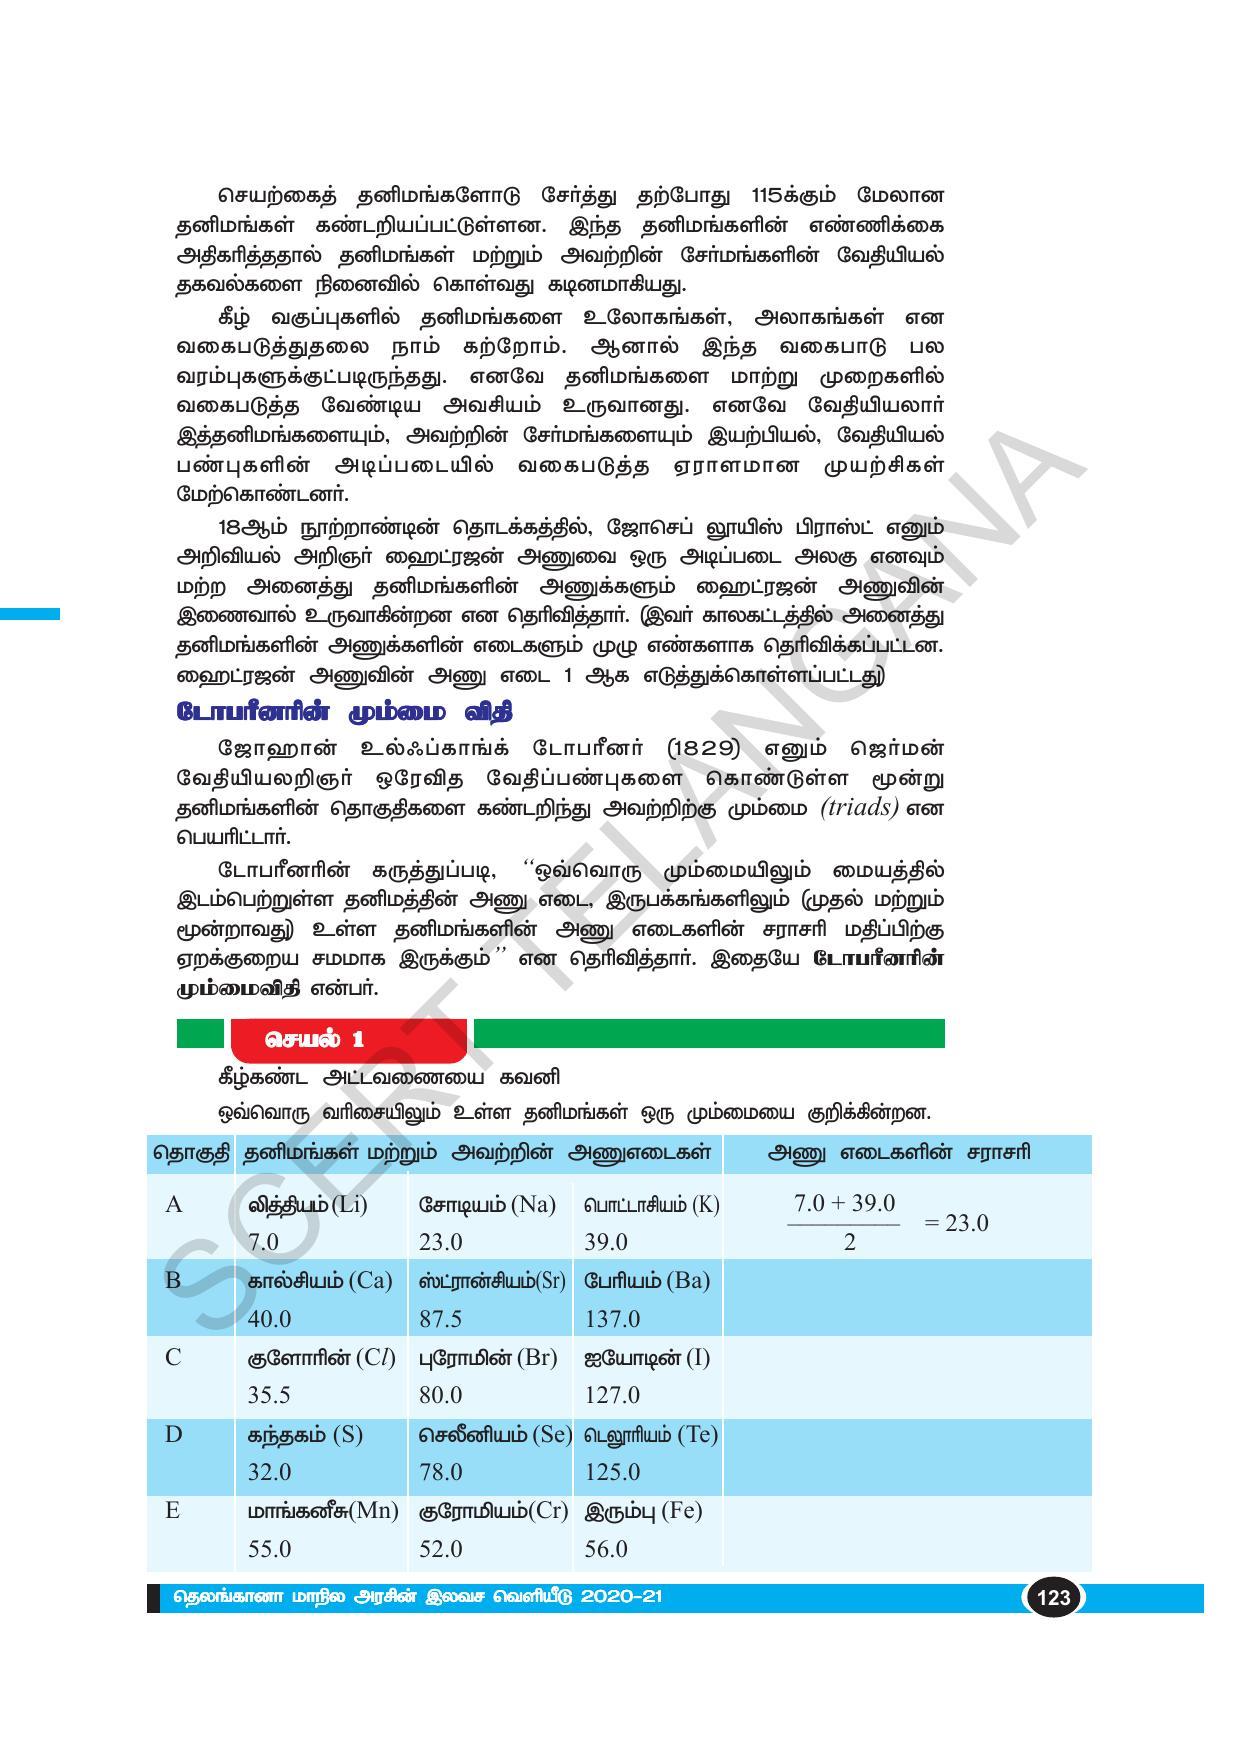 TS SCERT Class 10 Physical Science(Tamil Medium) Text Book - Page 135